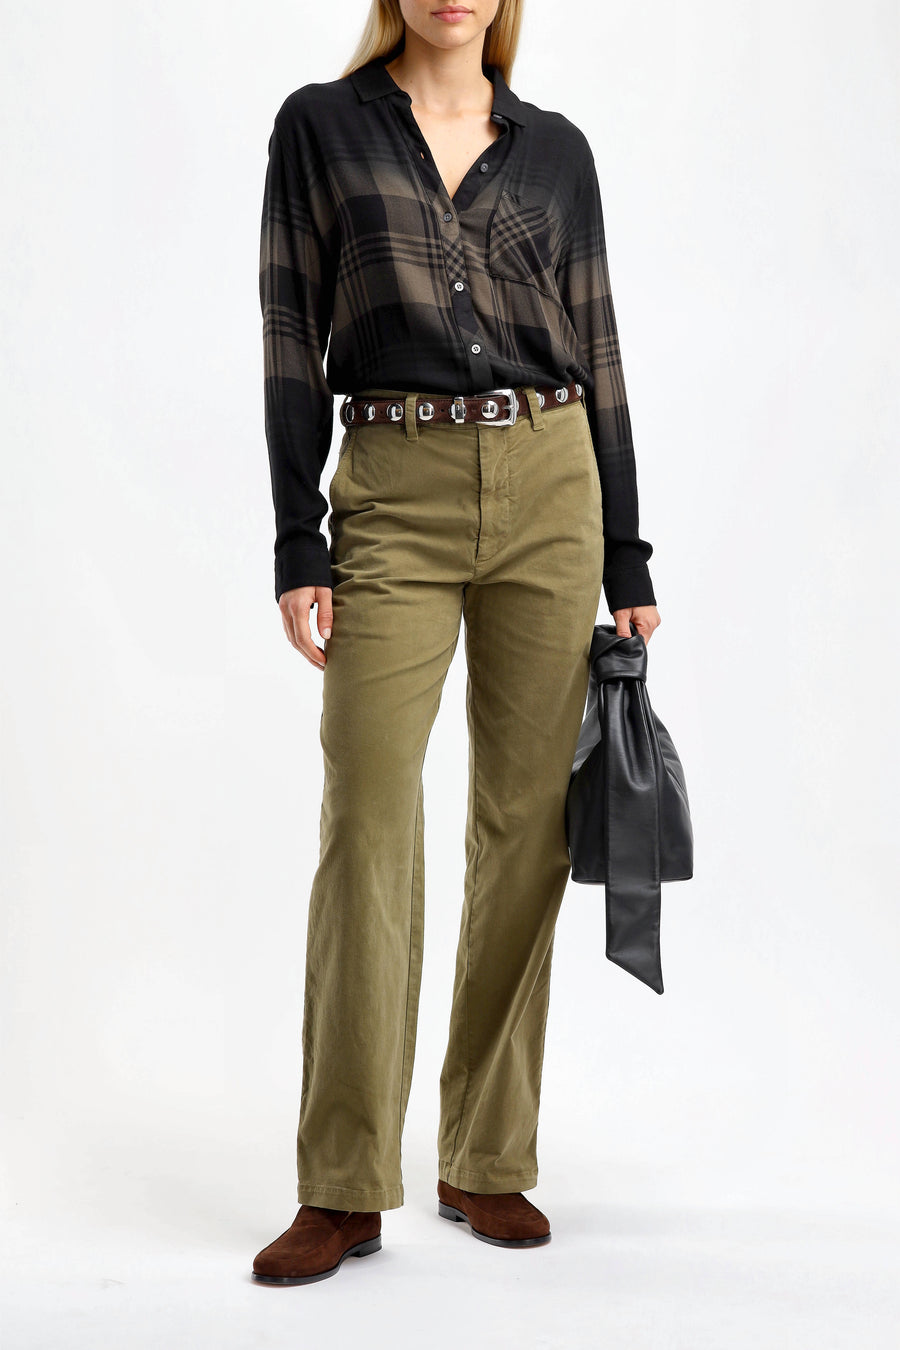 Bluse Hunter in Olive/SchwarzRails - Anita Hass